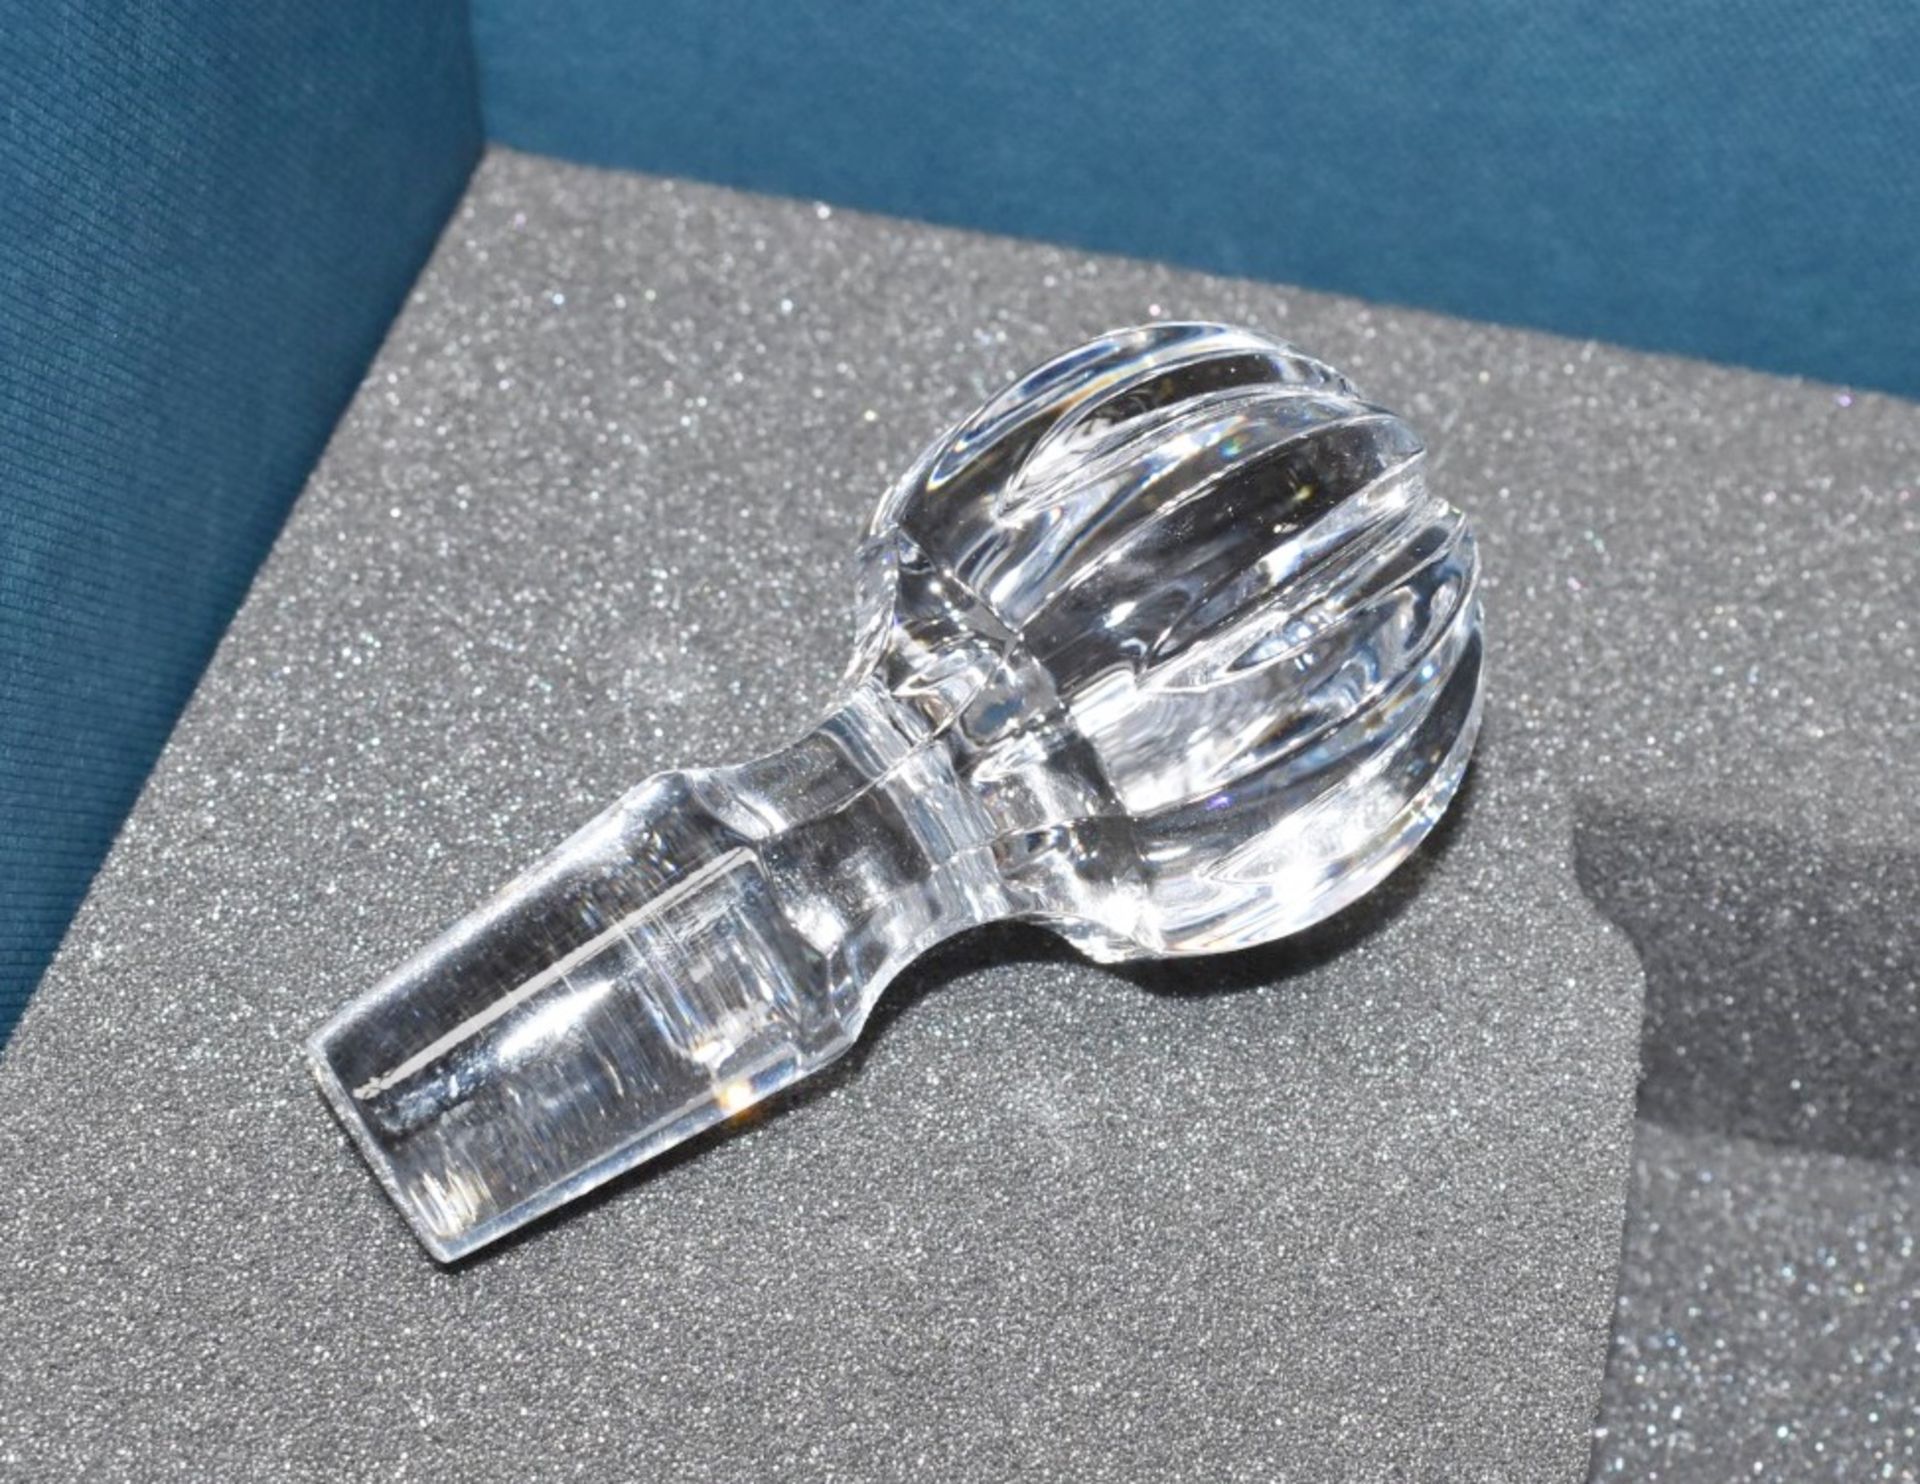 1 x WATERFORD 'Lismore' Lead Crystal Ships Decanter (850ml) - Original Price £450.00 - Boxed - Image 7 of 9